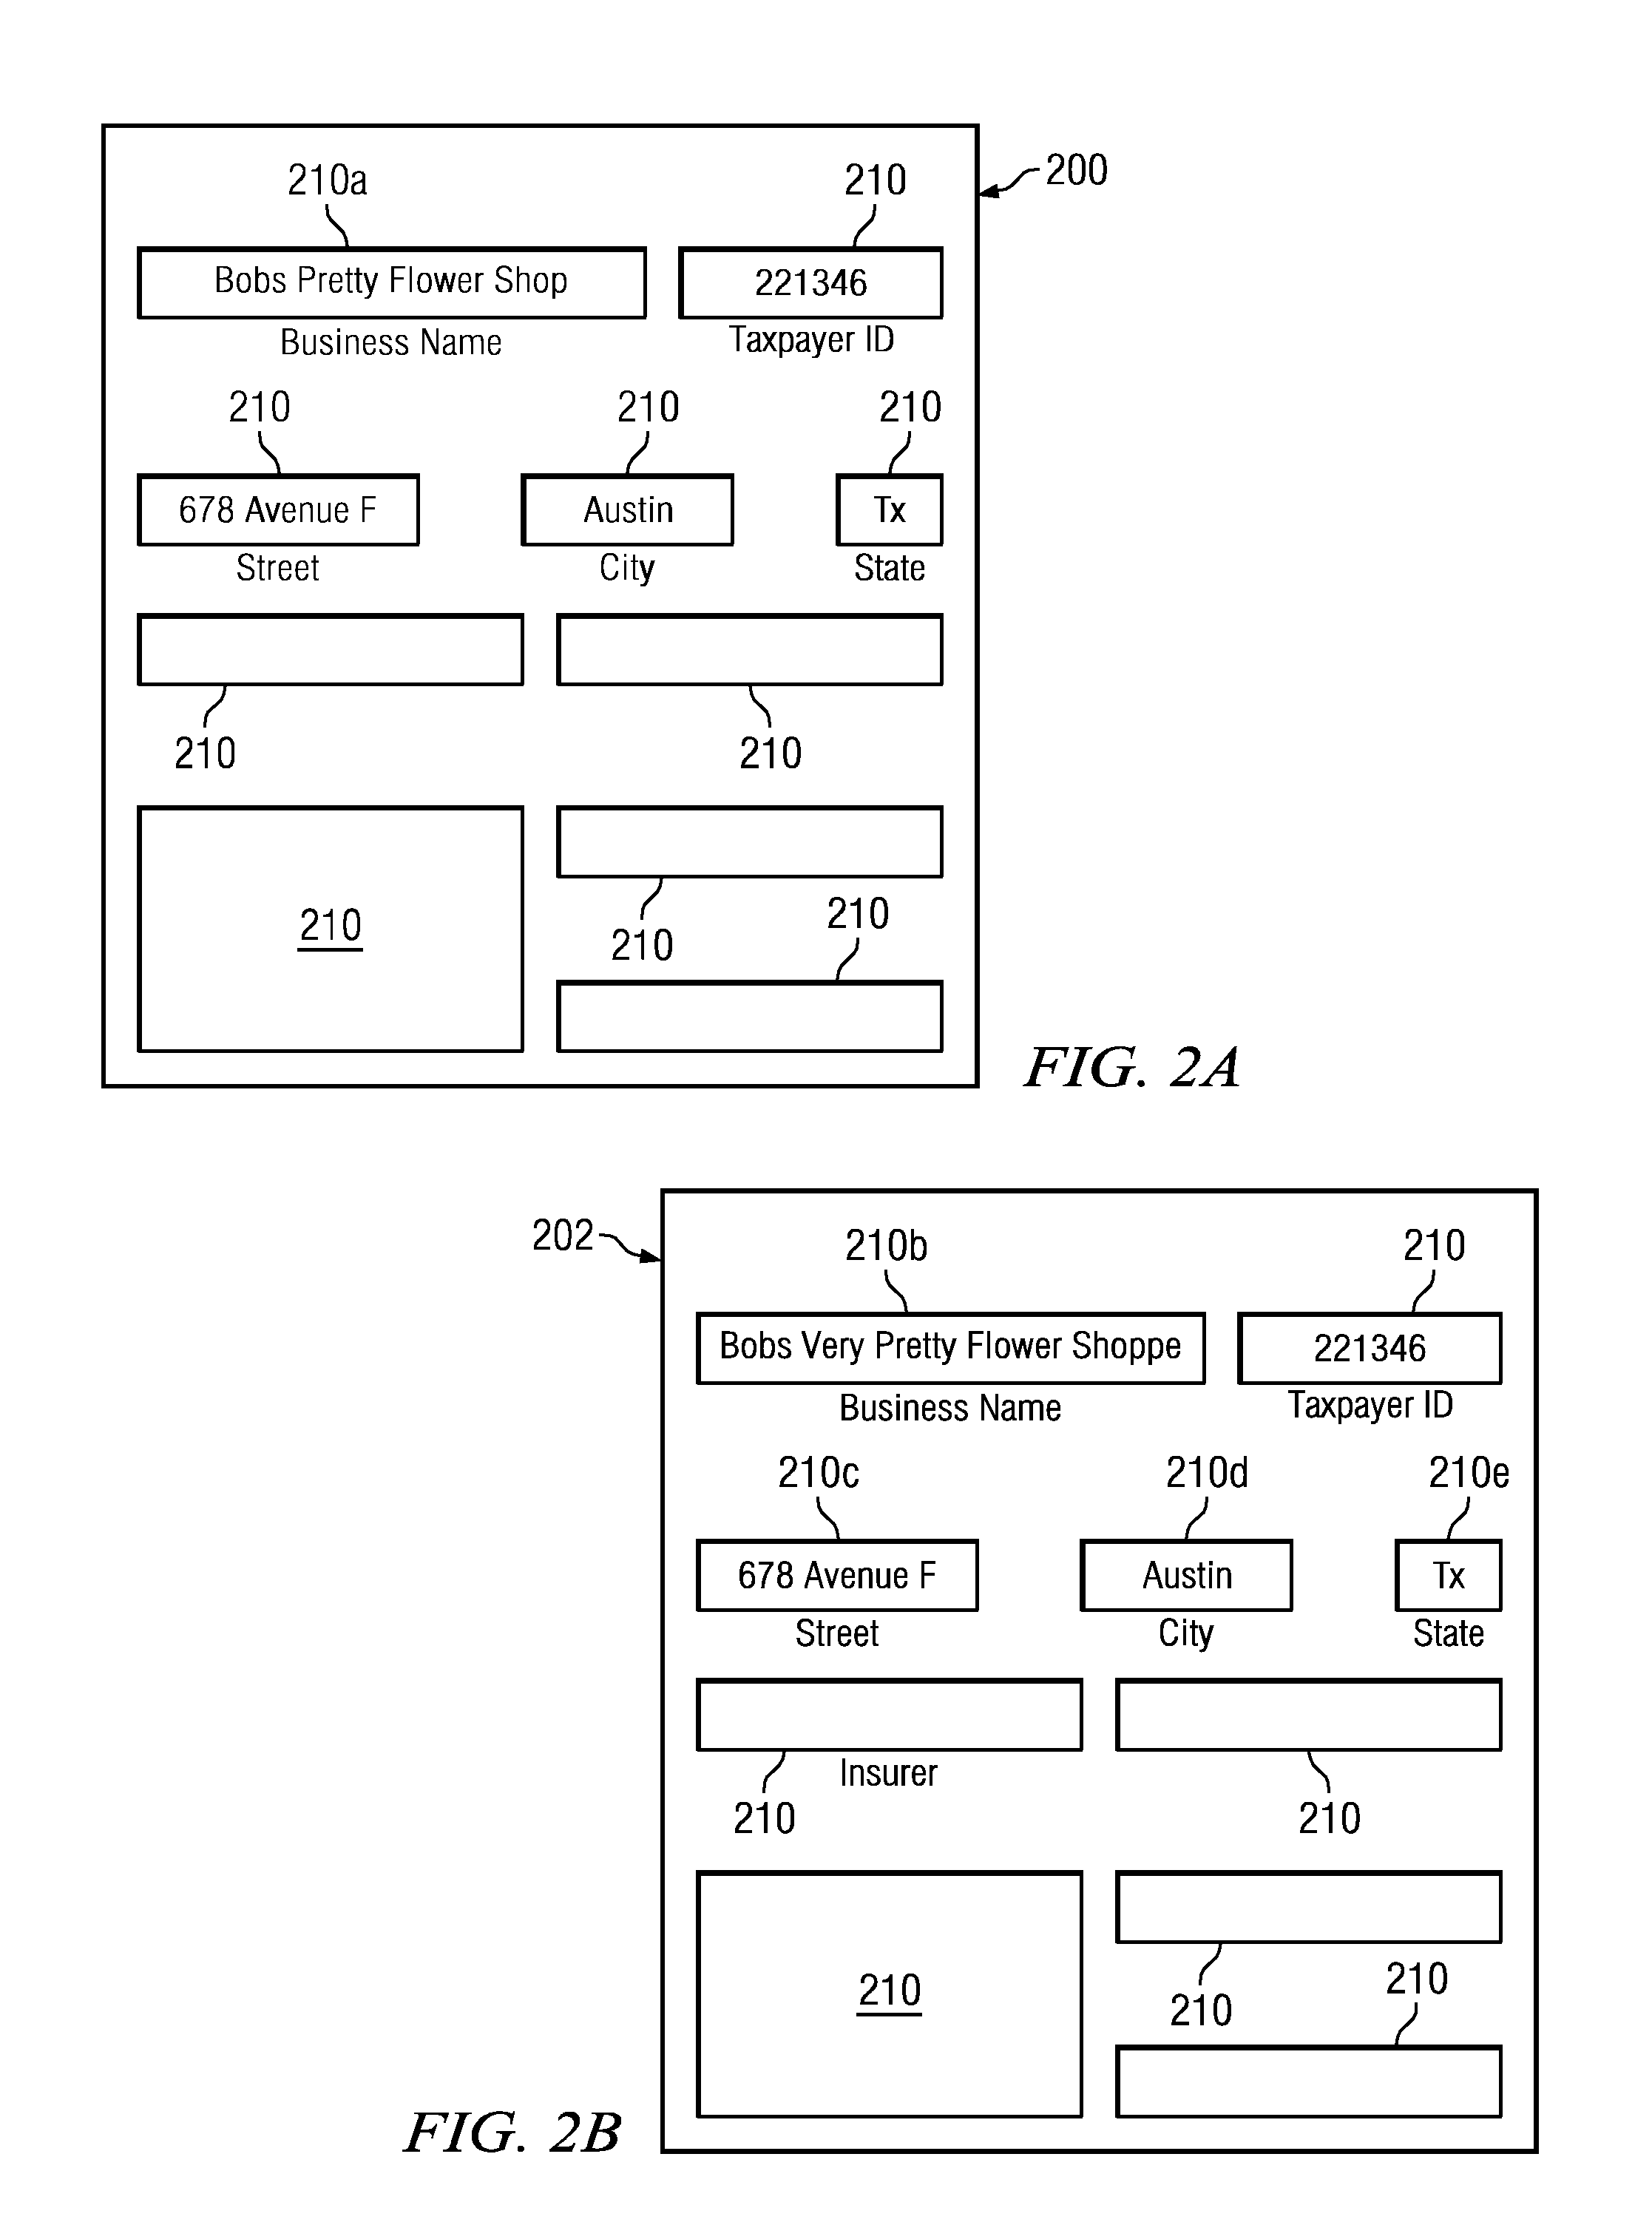 Method and system for comparing attributes such as business names